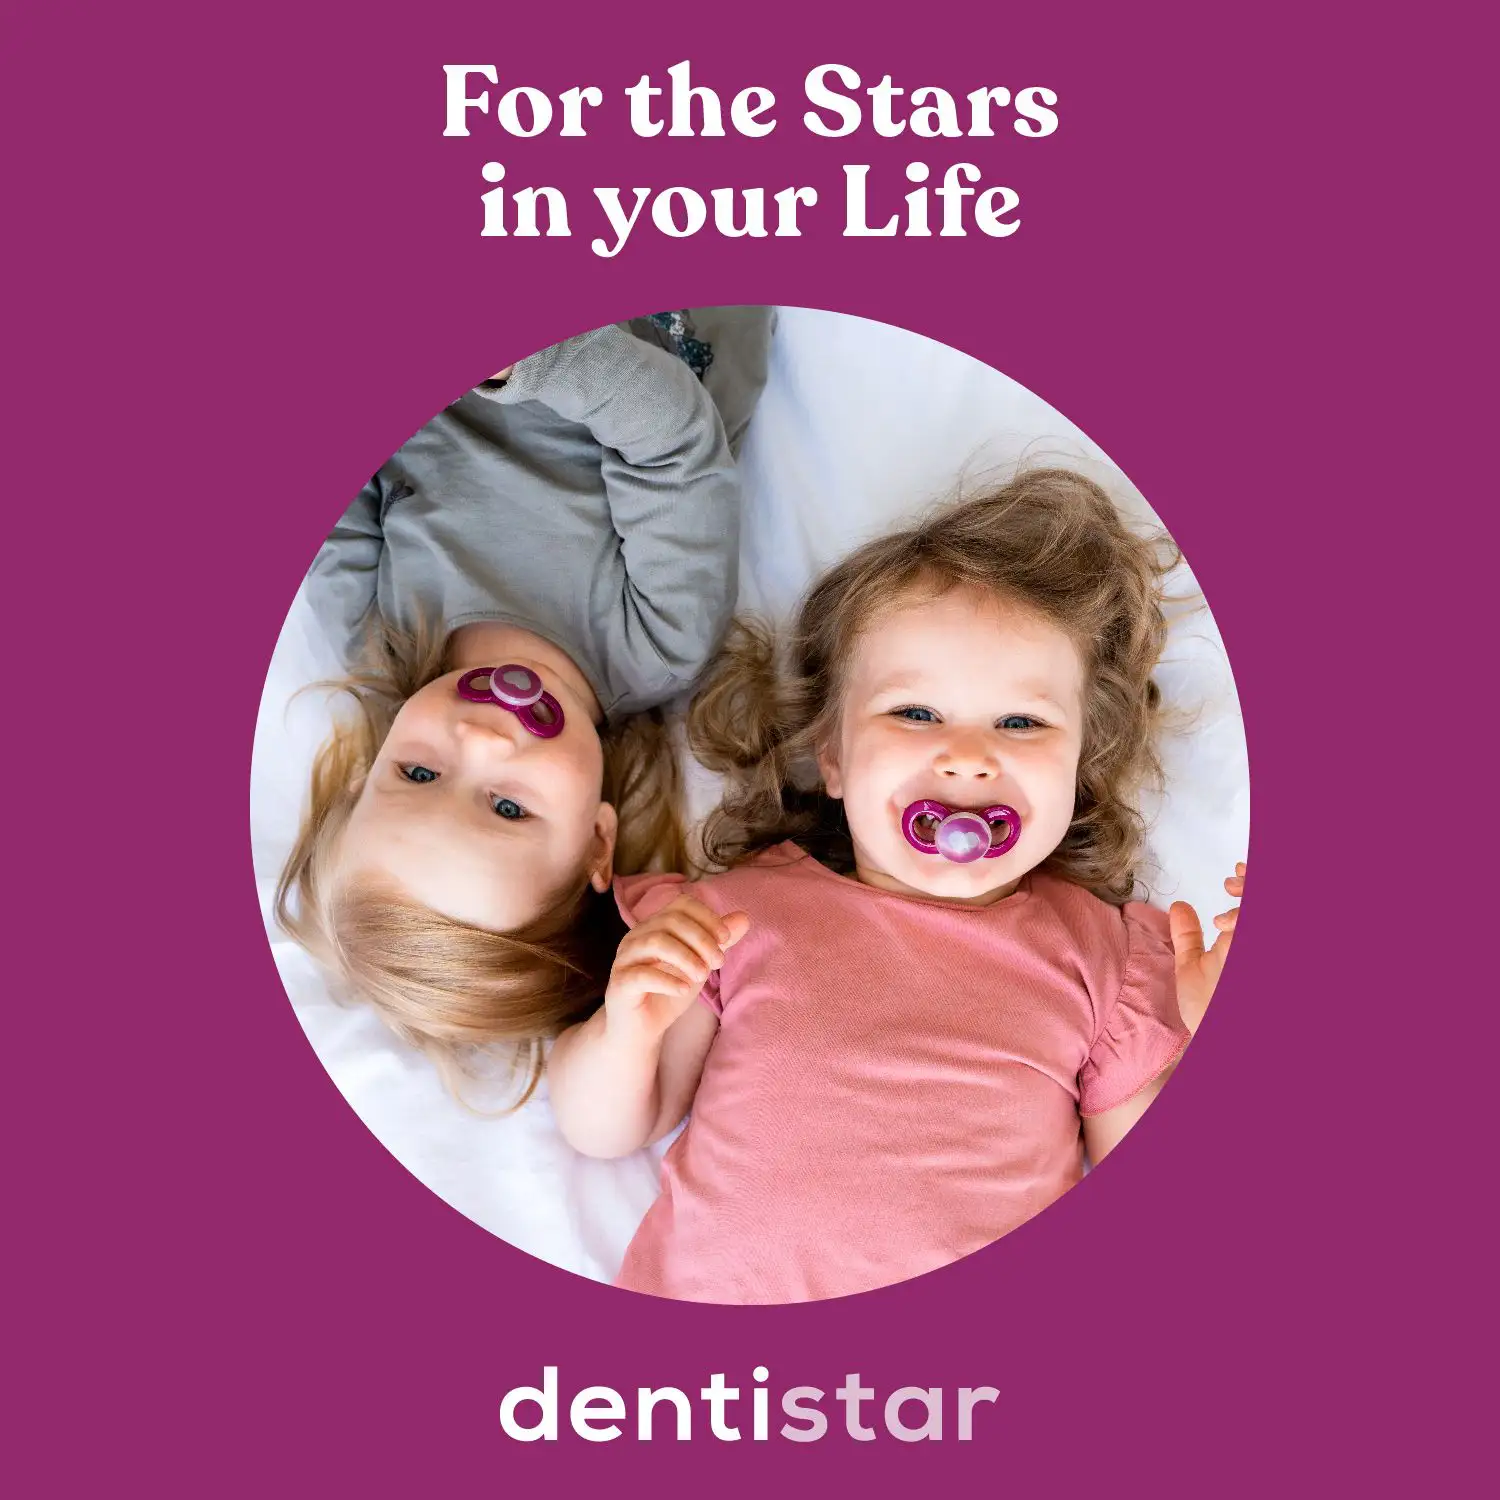 Dentistar Baby Gift Set (7 pieces)